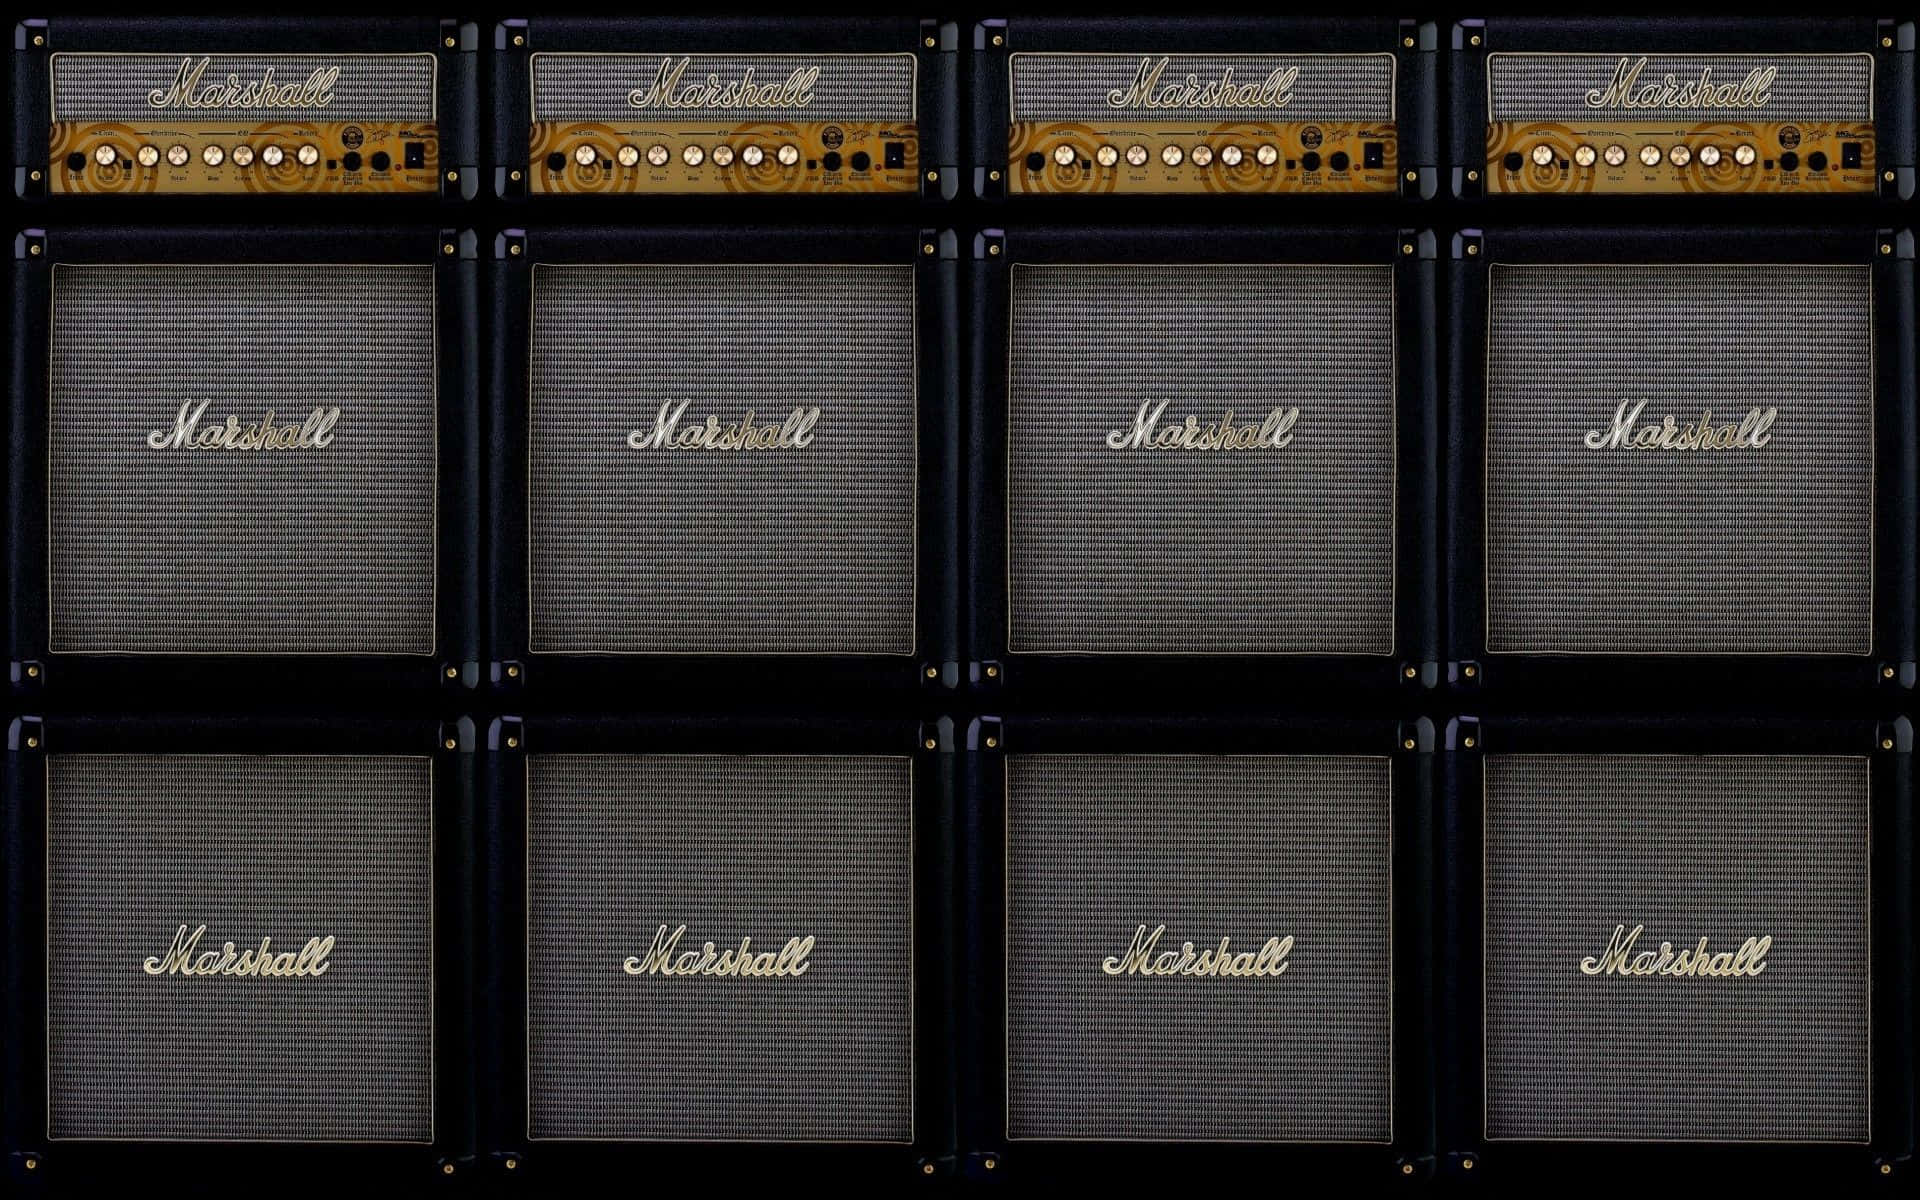 Image  Turn Up the Volume with This Stylish Guitar Amp Wallpaper